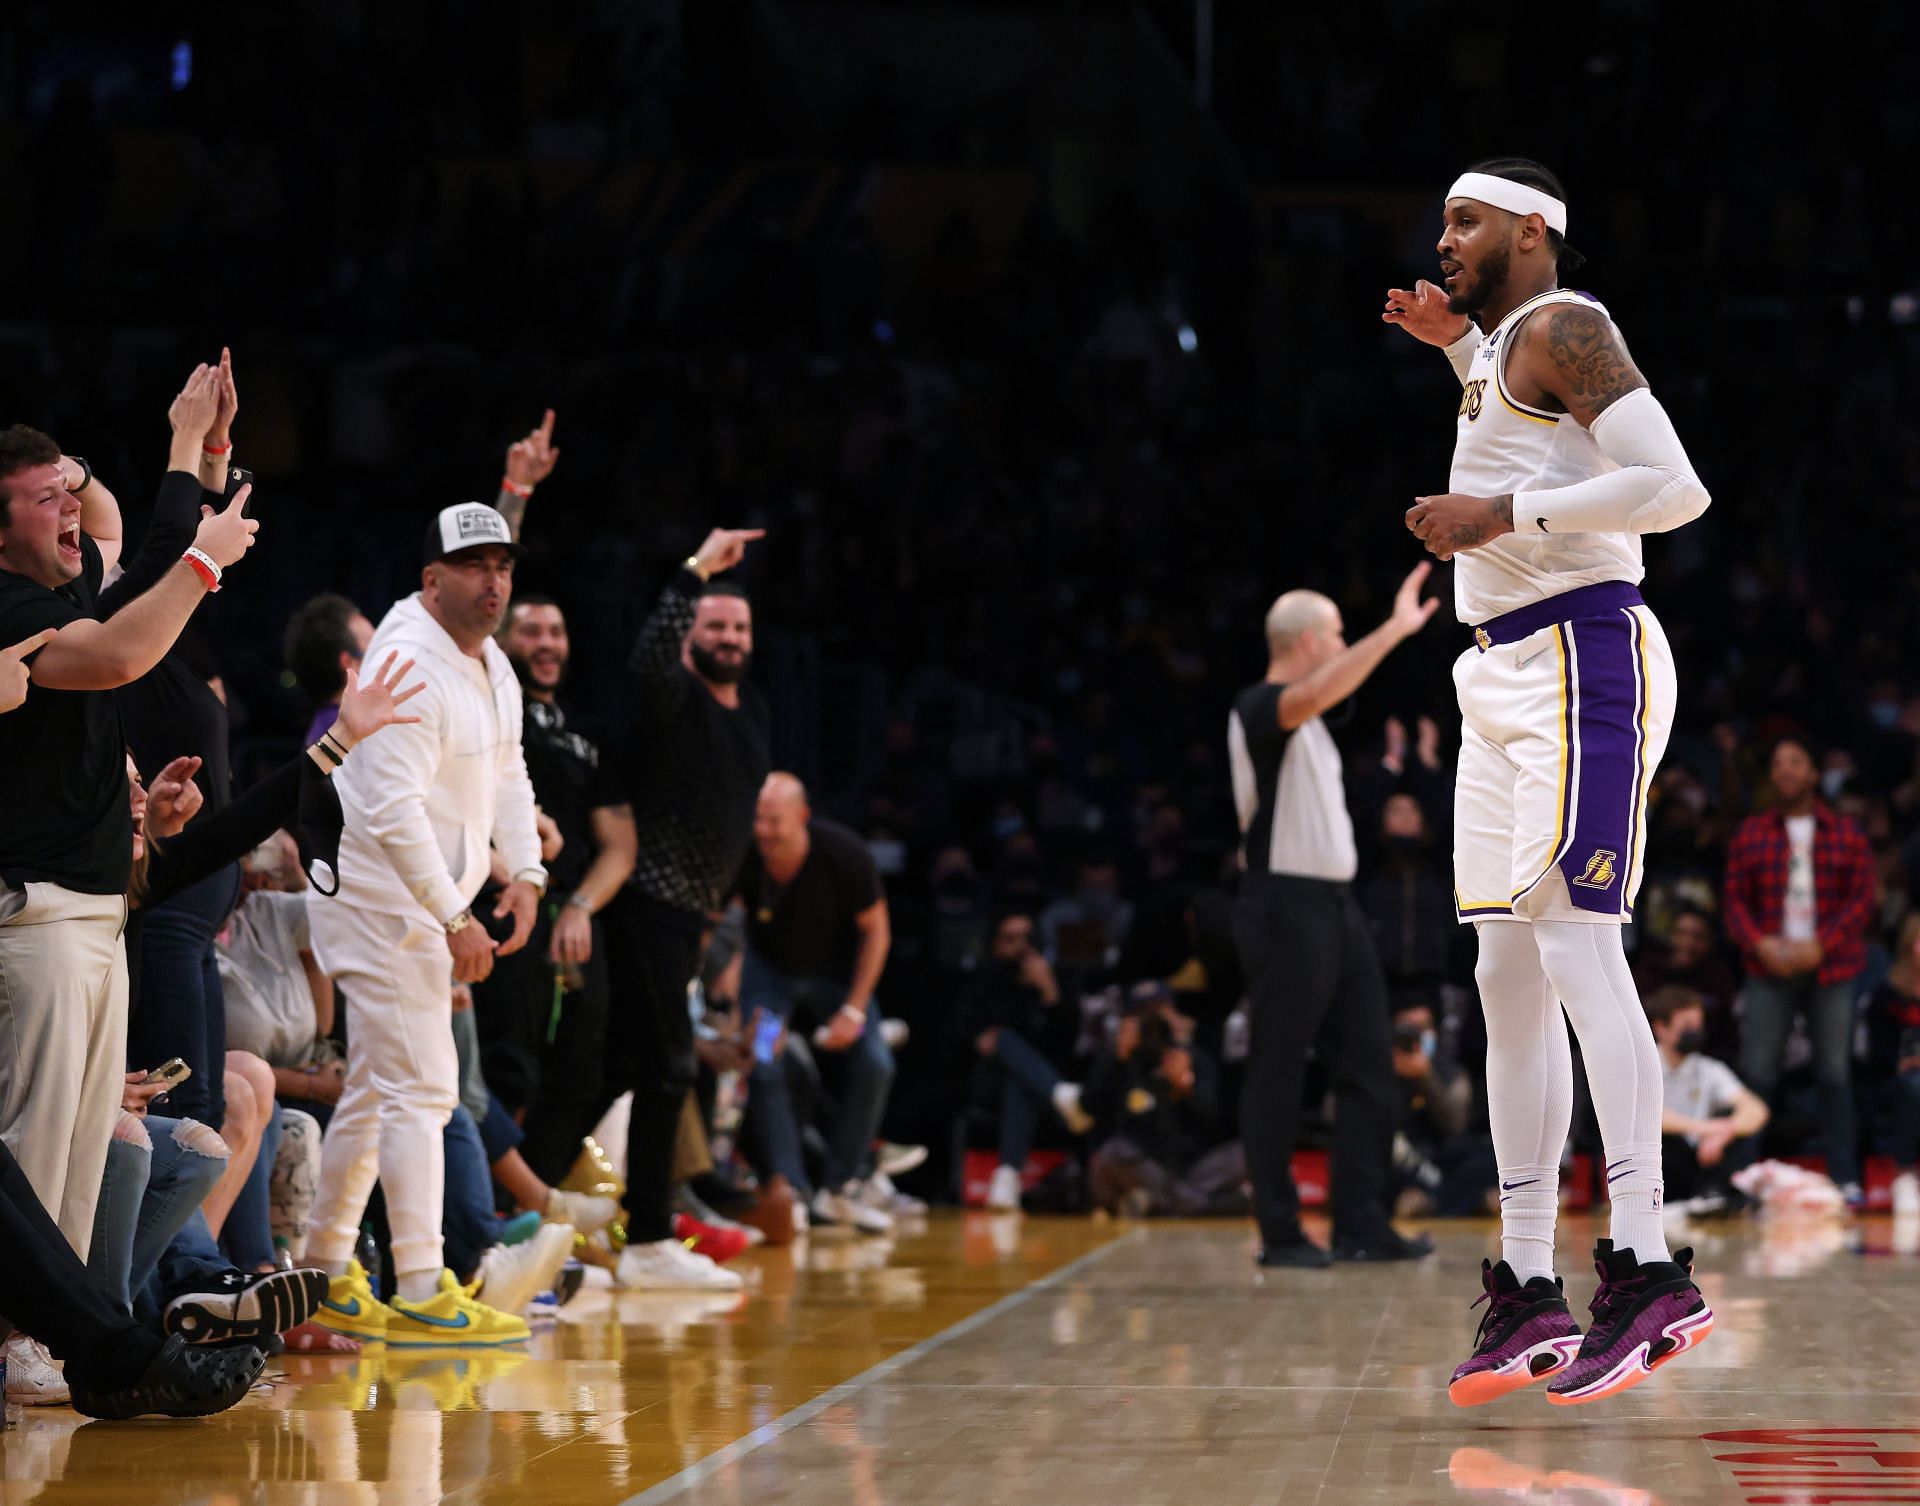 Carmelo Anthony celebrates after making a 3-point field goal.